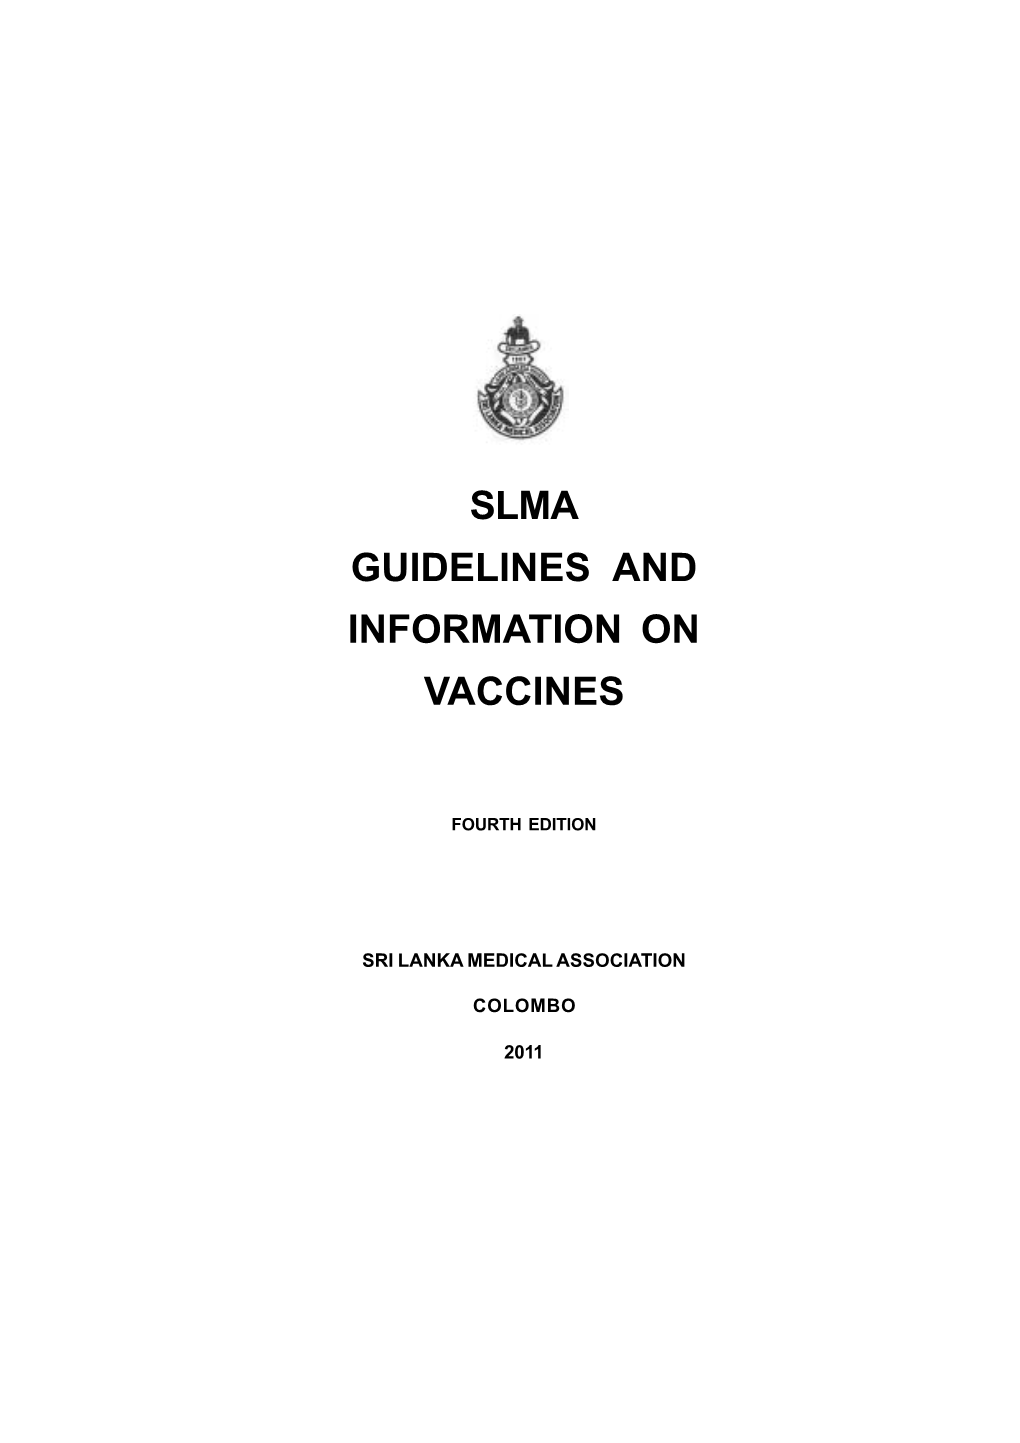 Slma Guidelines and Information on Vaccines